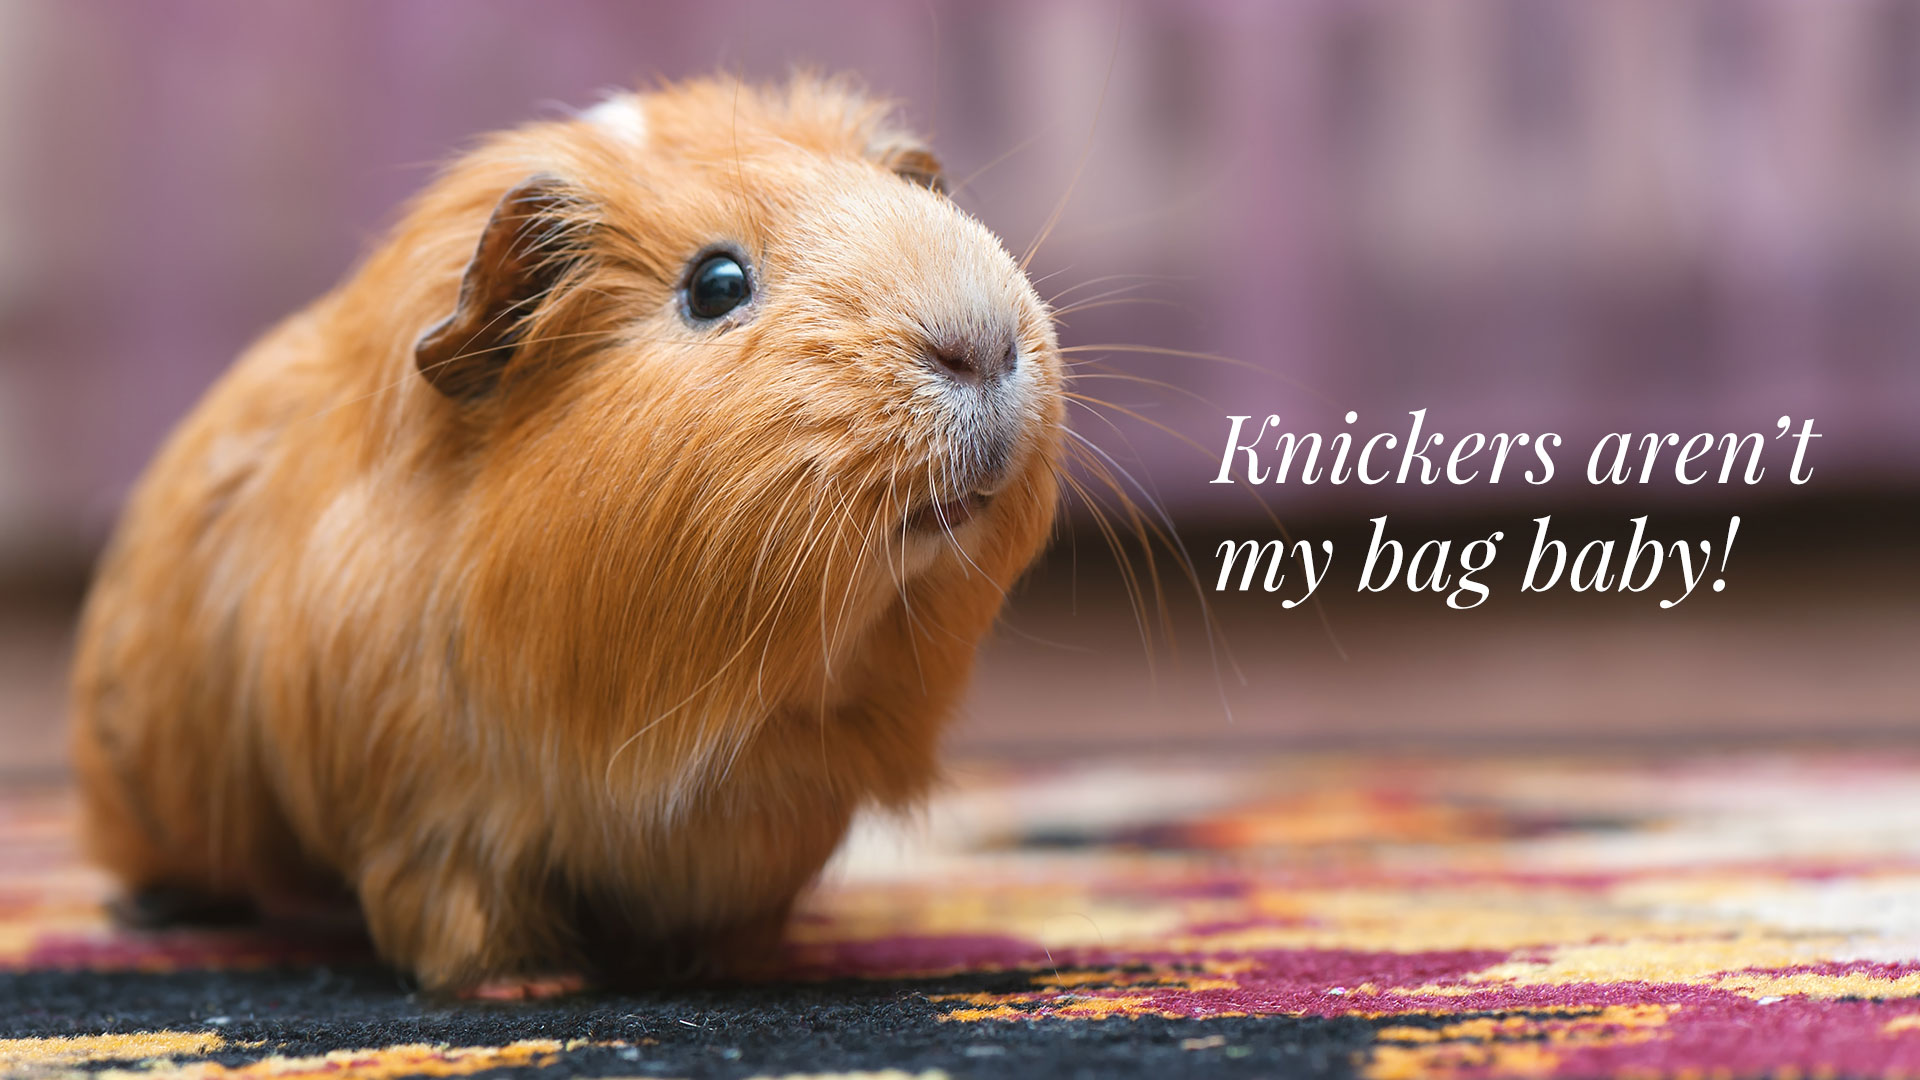 Whatever you do, don’t put a guinea pig in knickers!